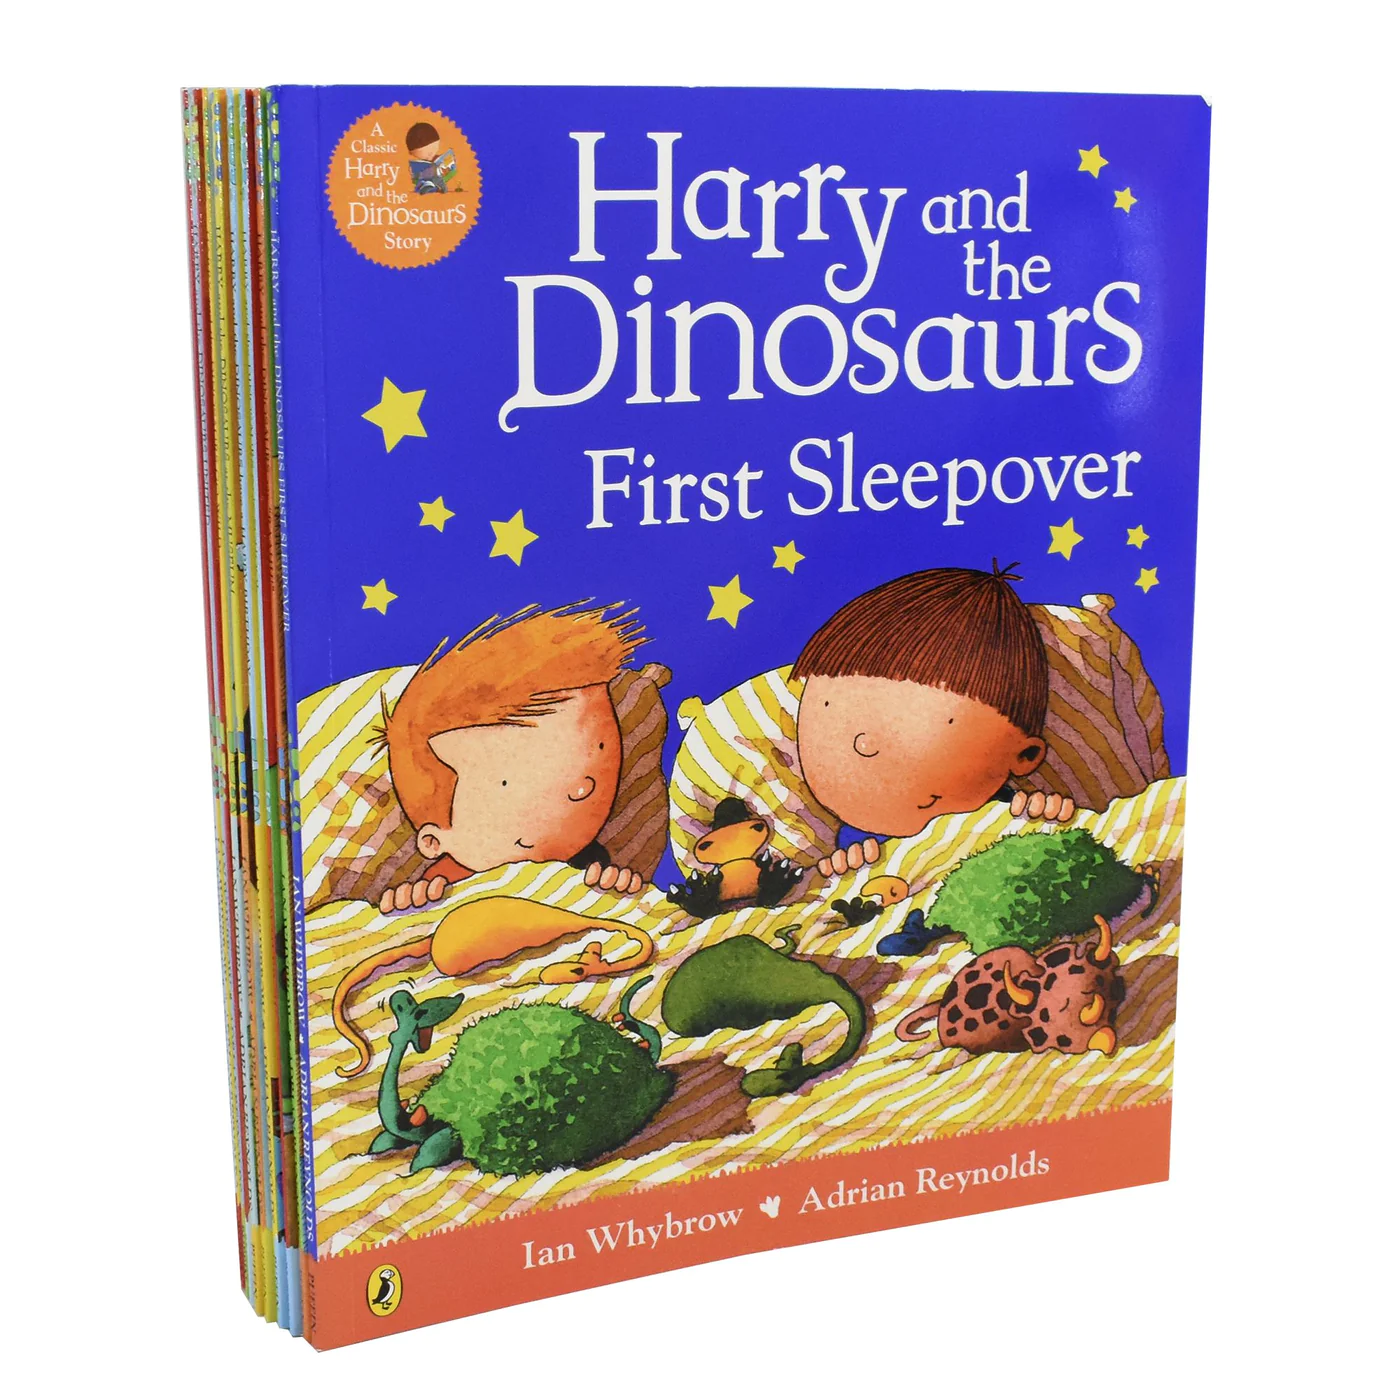 Harry And His Bucket Full Of Dinosaurs 10 Books Collection Set By Ian Whybrow - Ages 2-7 - Paperback